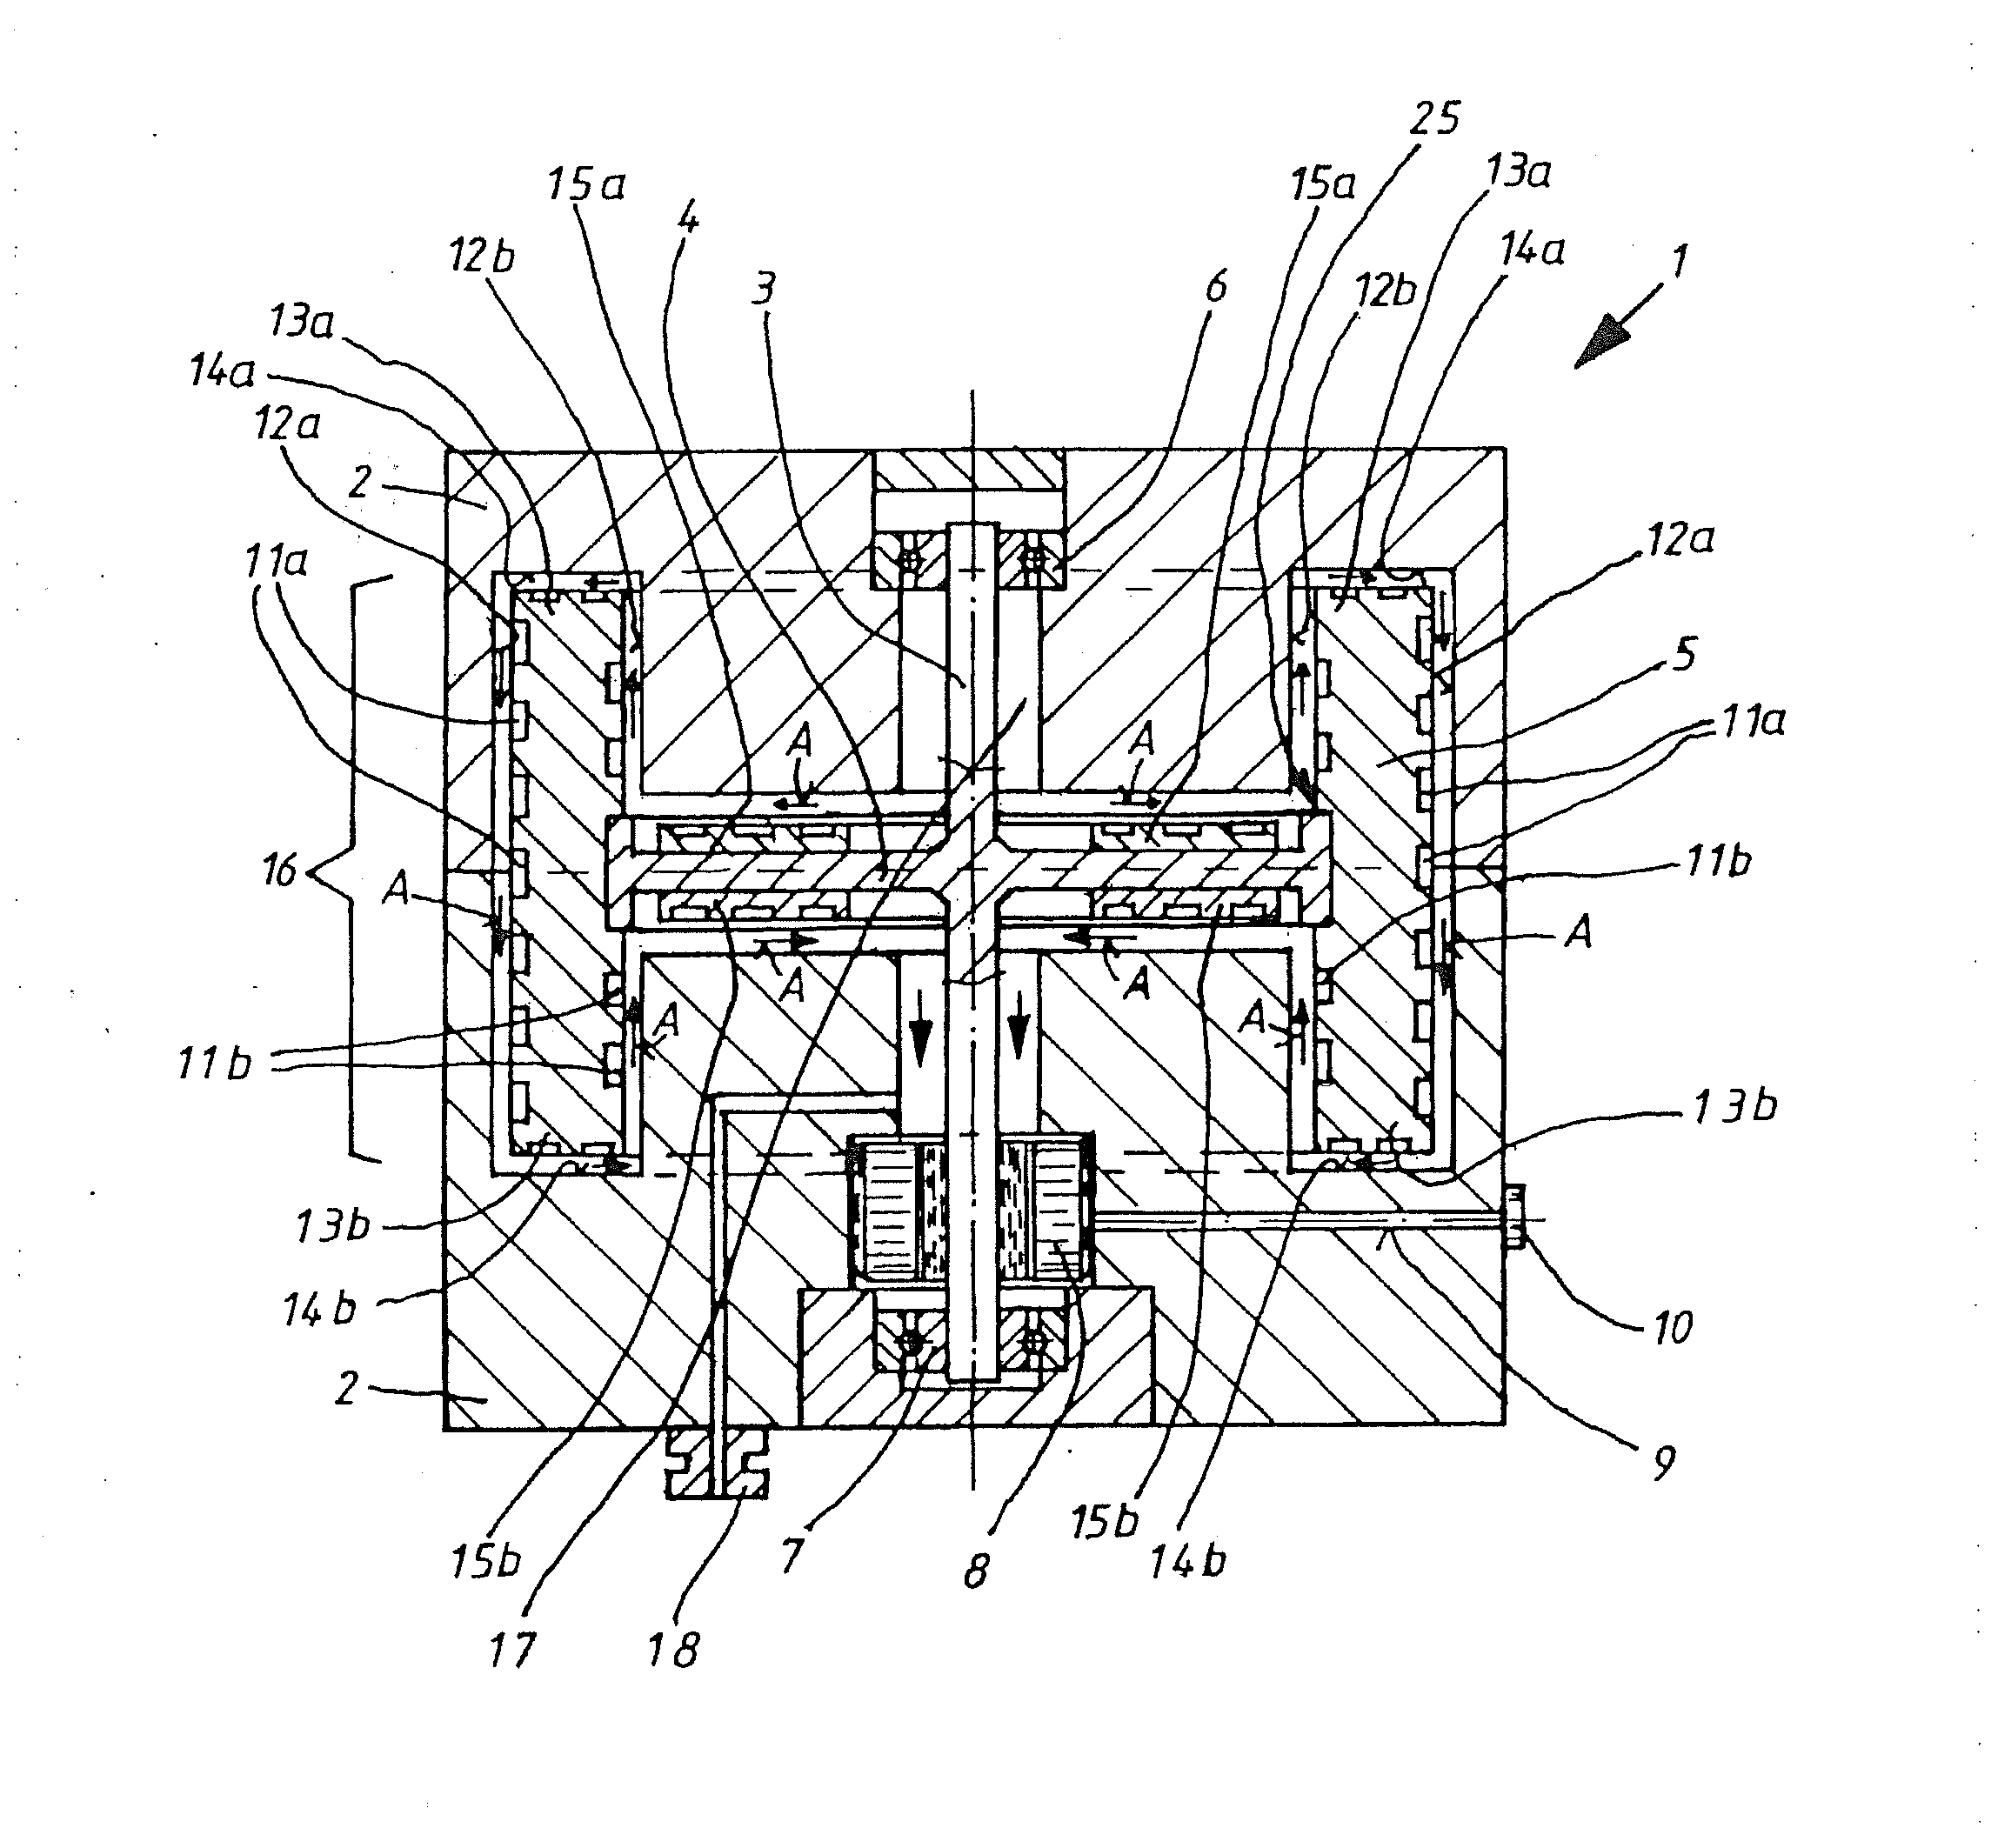 Apparatus for kinetic energy storage